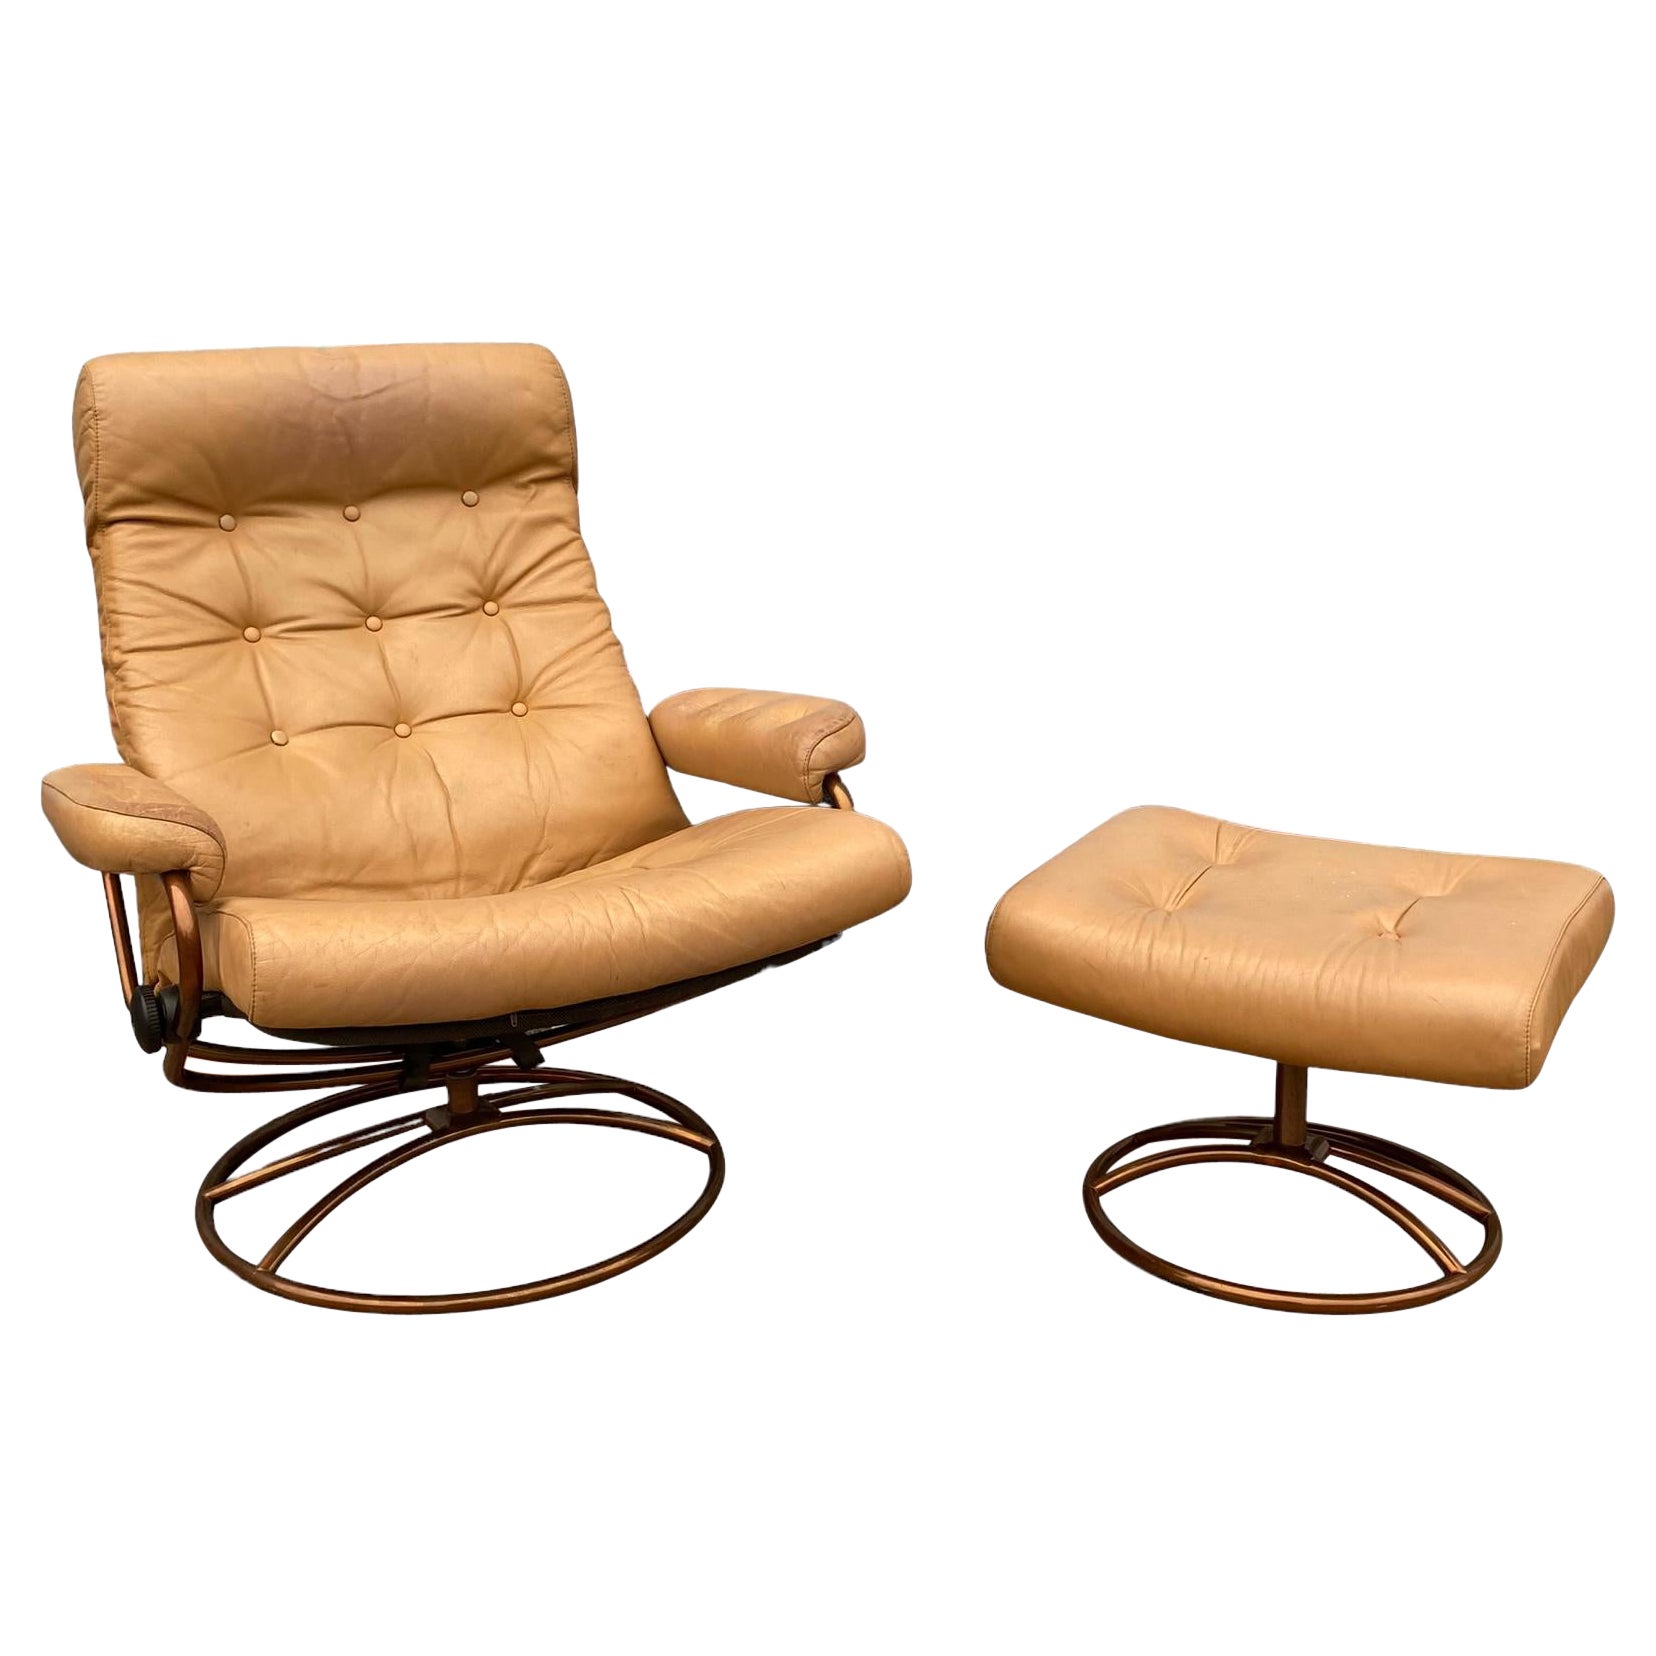 Ekornes Stressless Reclining Lounge Chair and Ottoman in Cream with Copper Frame